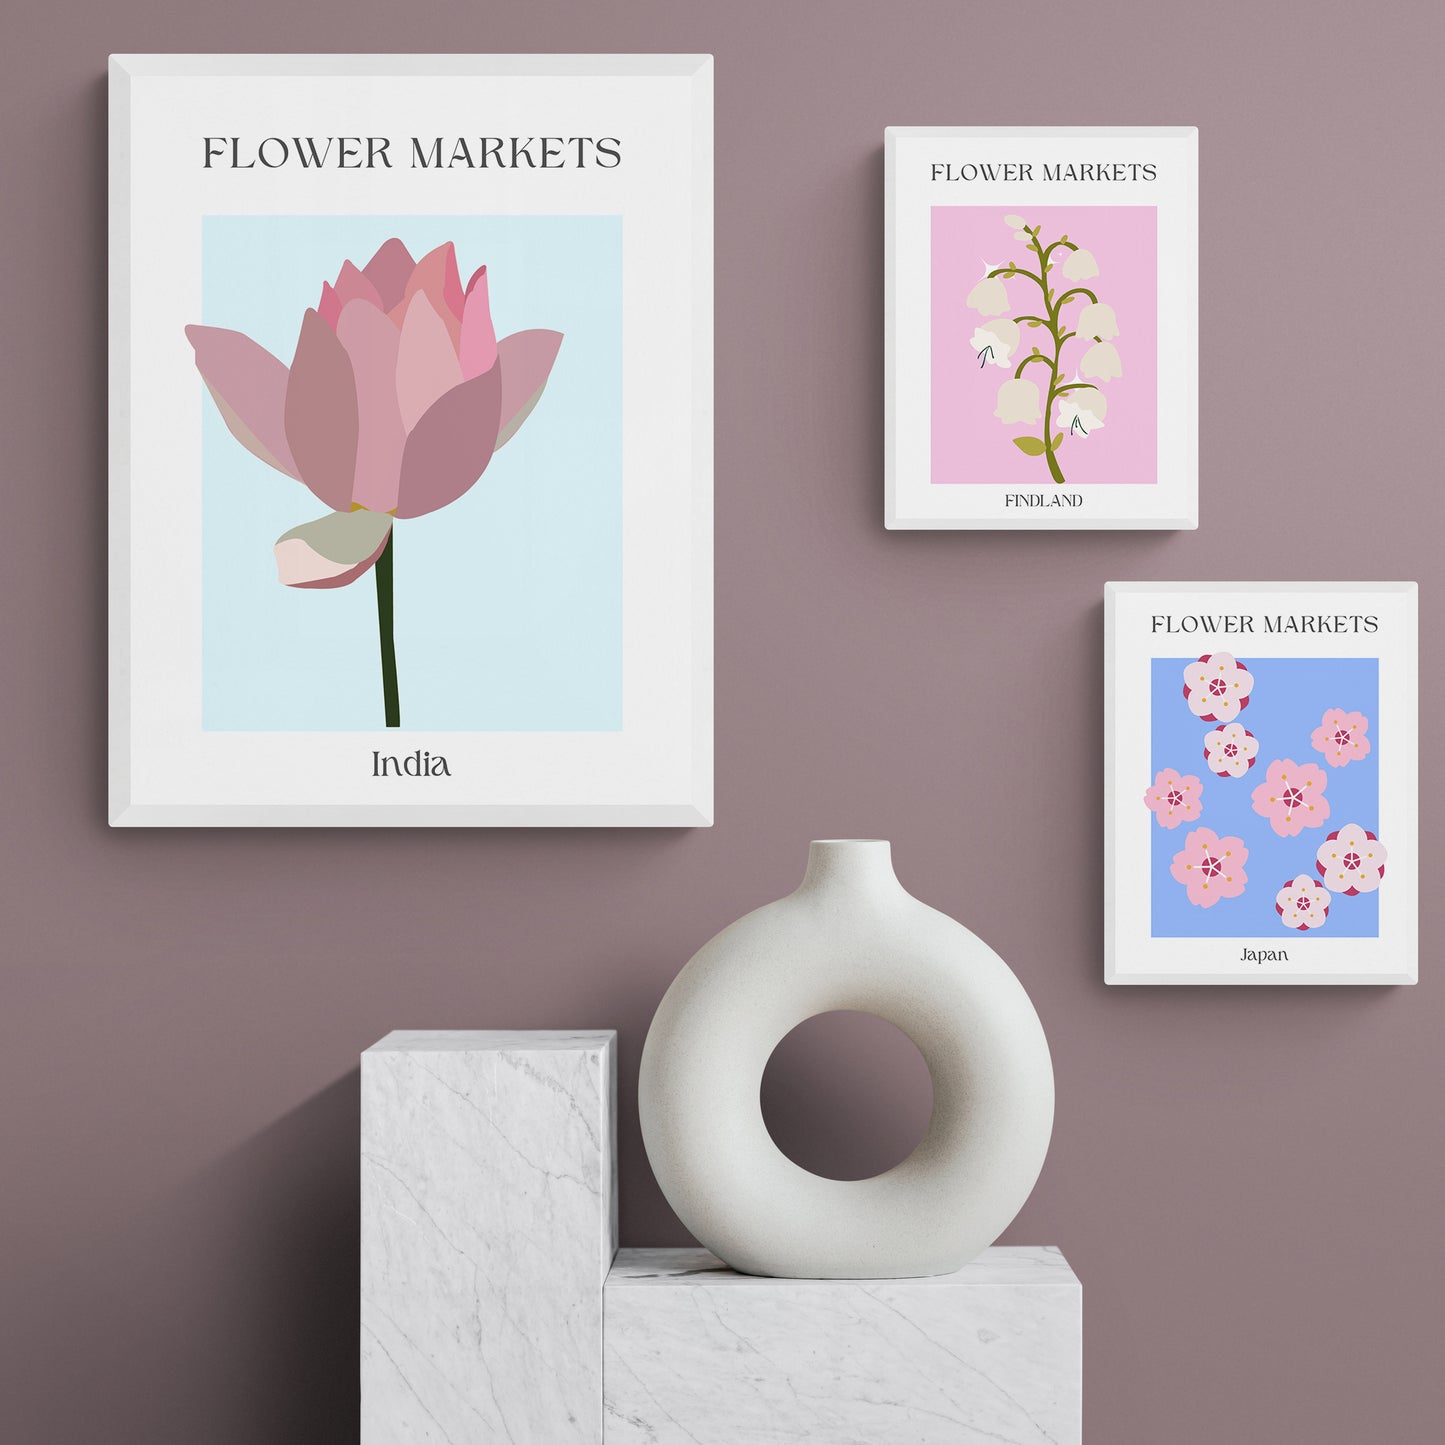 This South Korea Flowers Market Print poster is an expertly crafted combination of shapes, forms and art, inspired by Matisse art and pastel room decor. The bright and colorful poster includes gallery wall inspiration, making it a perfect addition to any home or office. Add a splash of Danish style with this stunning flower market poster.